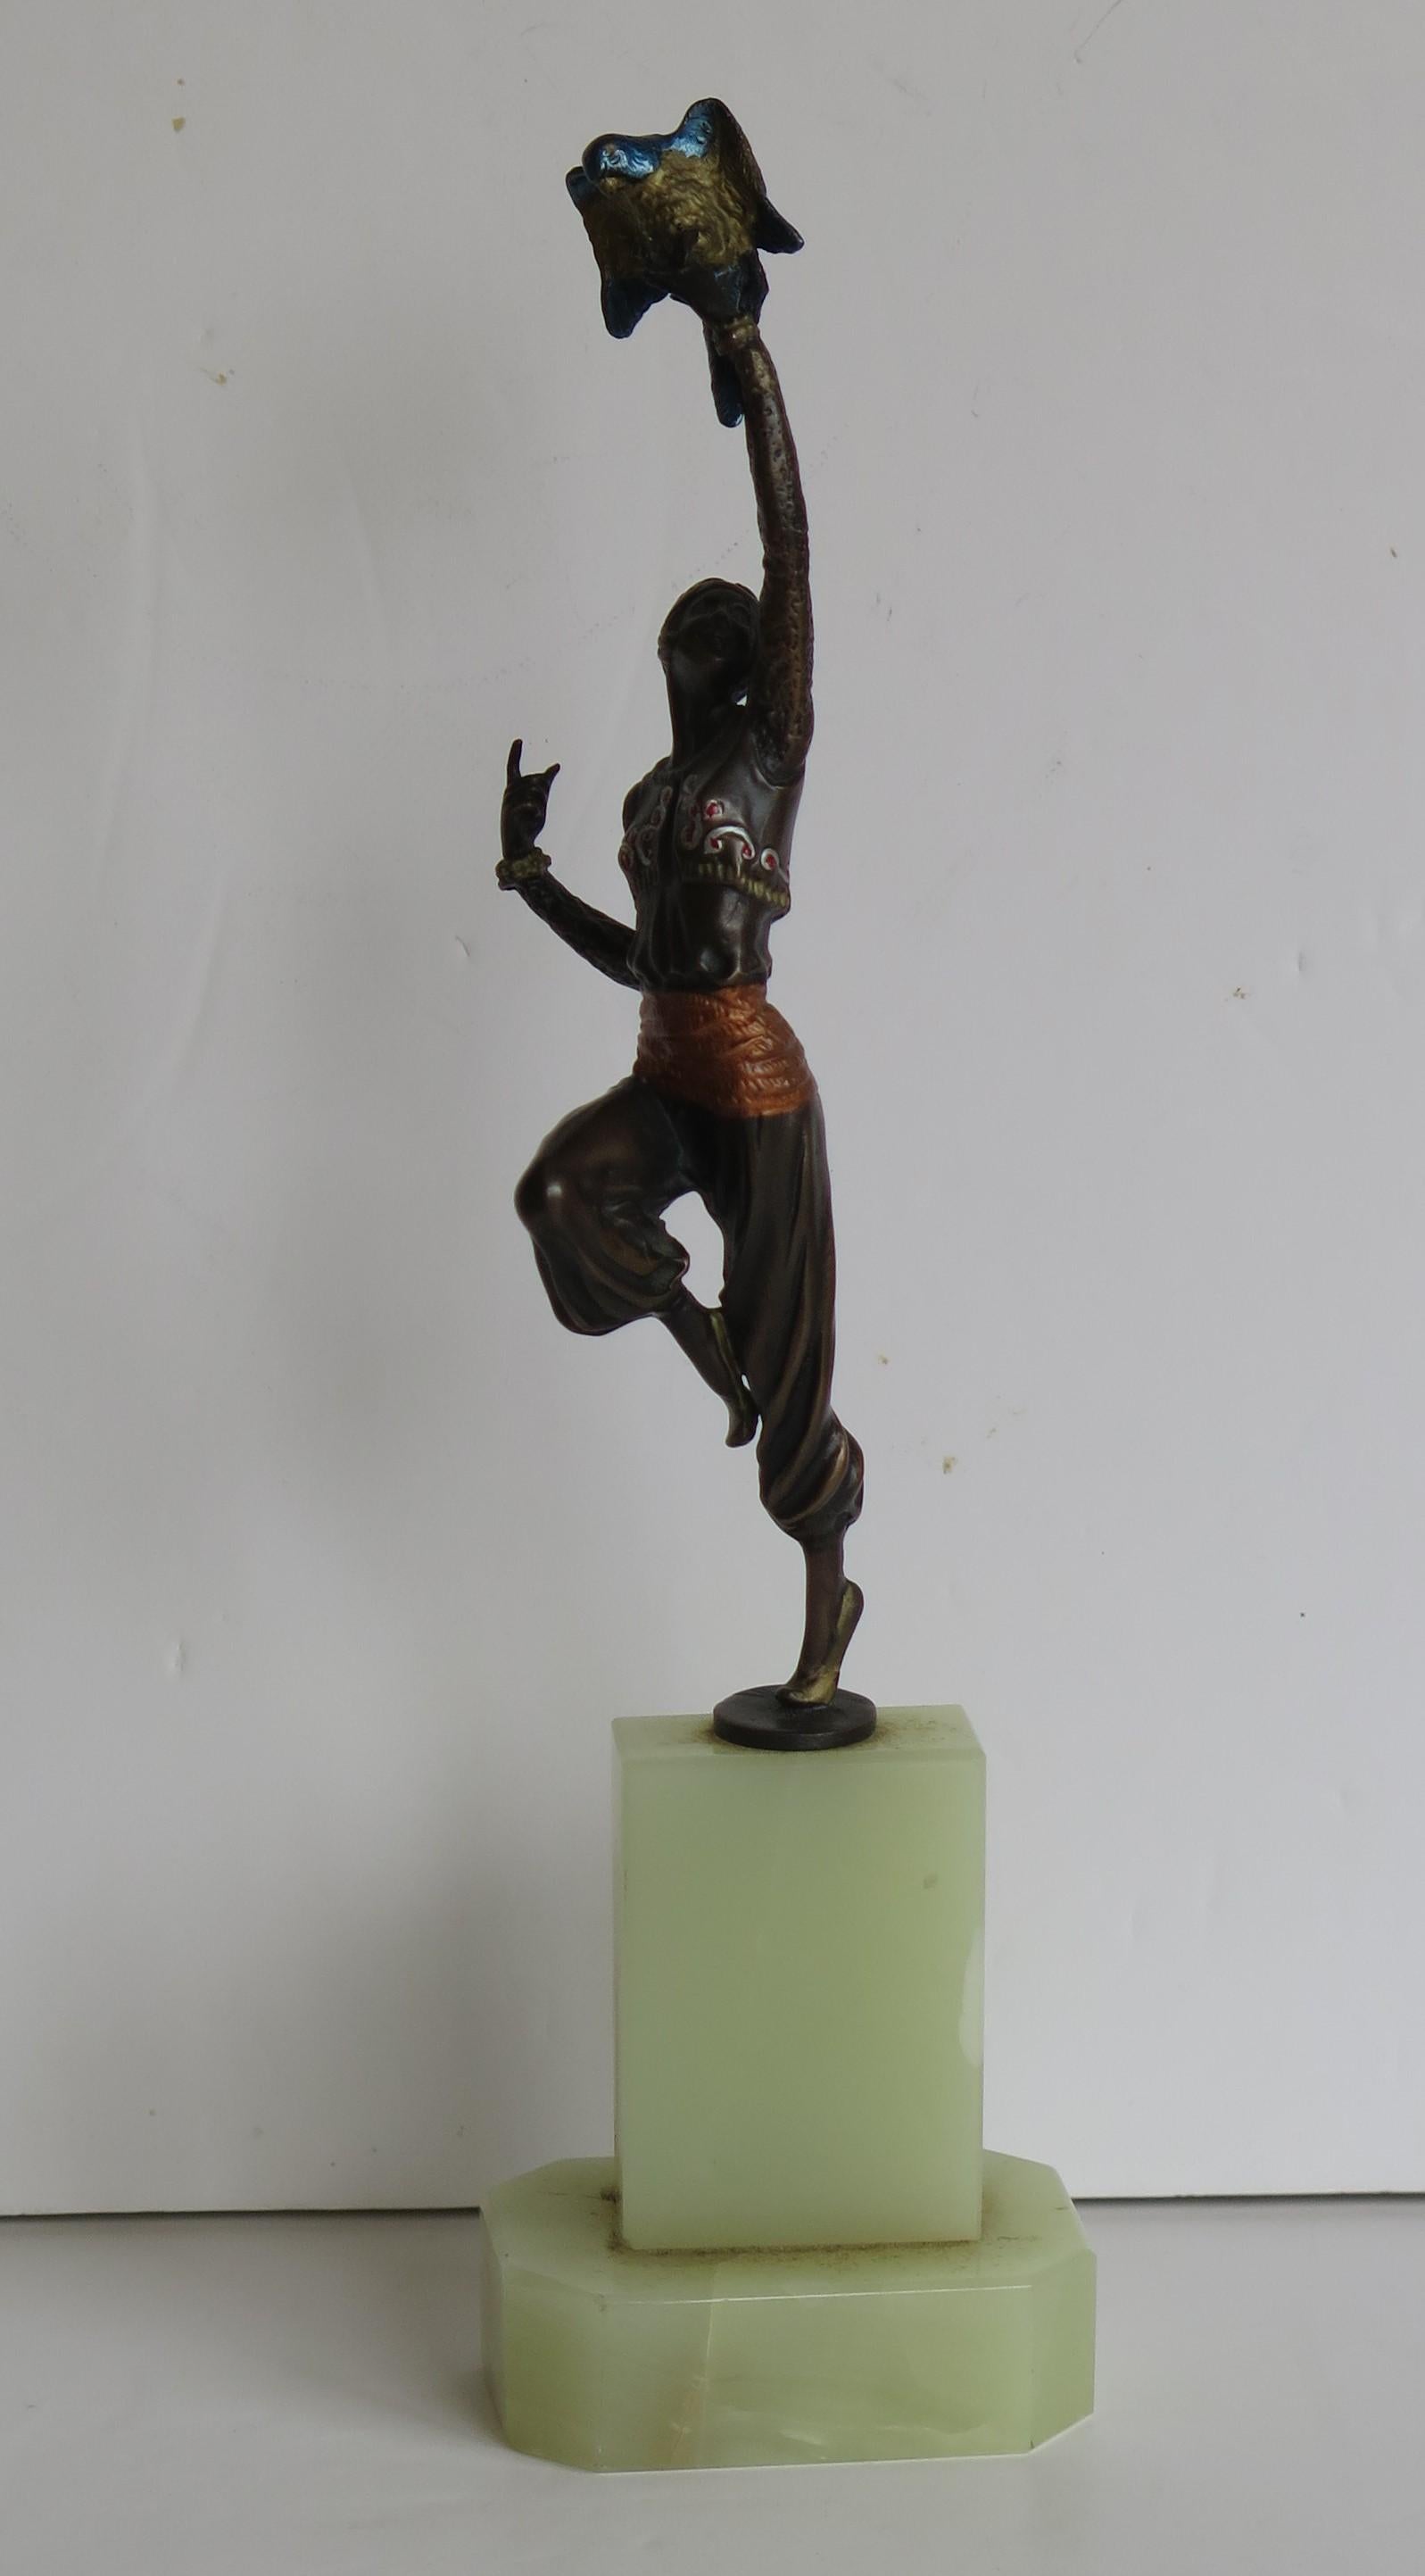 This is a cold painted bronze figurine of a Turkish dancer with a Parrot, by or after Paul Philippe, made in France in the Art Deco period, circa 1920 .

The figurine is beautifully sculpted by or after Paul Philippe - see below - with the long